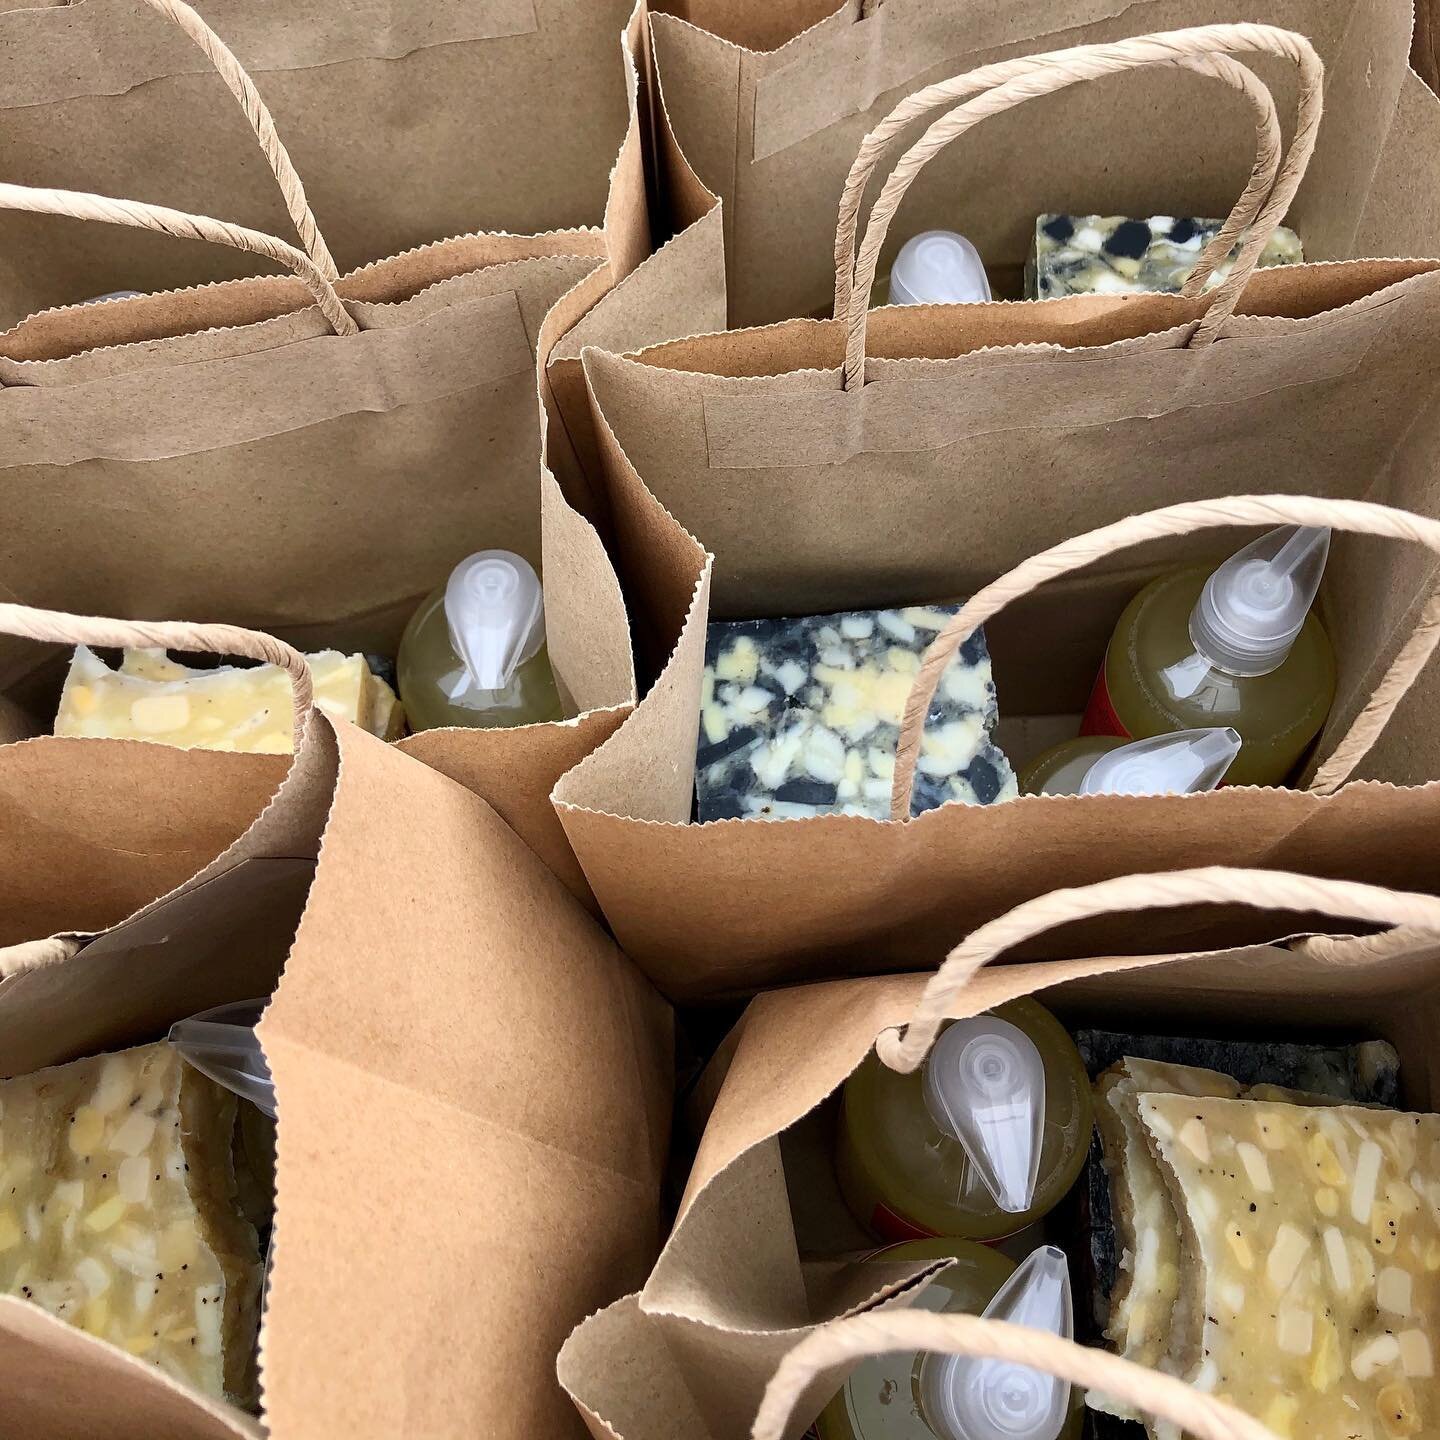 We donated 500 bars and 100 bottles of soap to the #communityfoodcupboard in @manchestervermont + a lovely nurse in Granville, NY in need of supplies.

And we are still shipping!
.
.
.
#smallbatch #smallbatchsoap #madebyhand #madeinvermont #makersmov